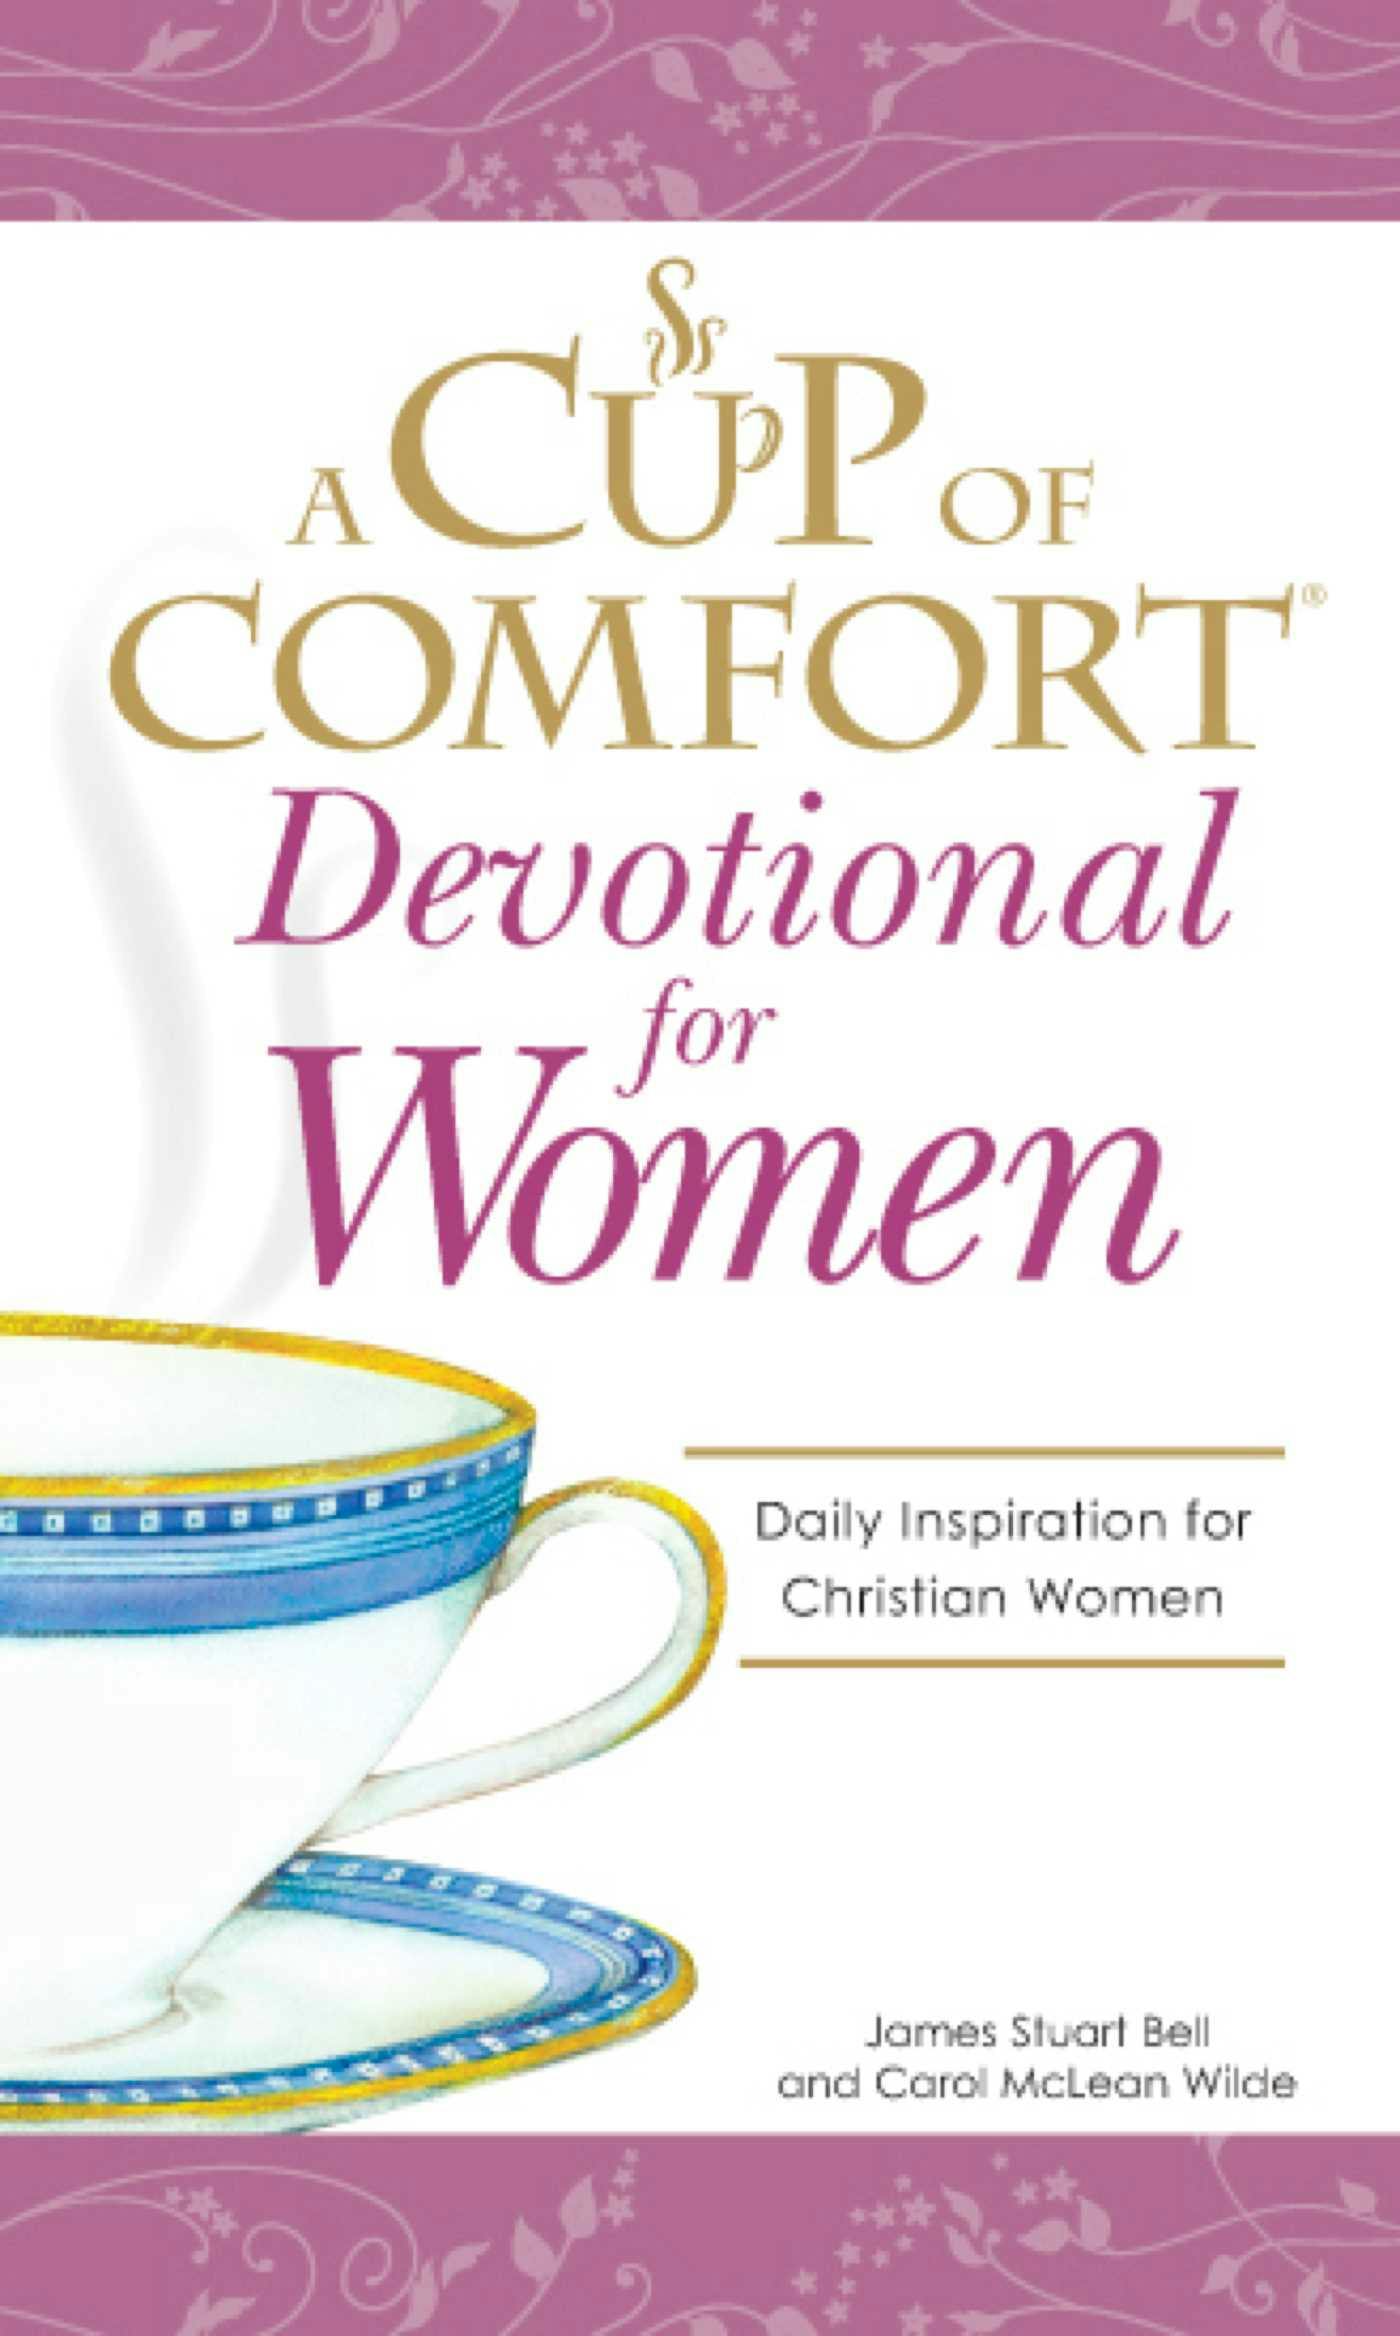 A Cup of Comfort Devotional for Women: A daily reminder of faith for Christian women by Christian Women - James Stuart Bell, Carol McLean Wilde